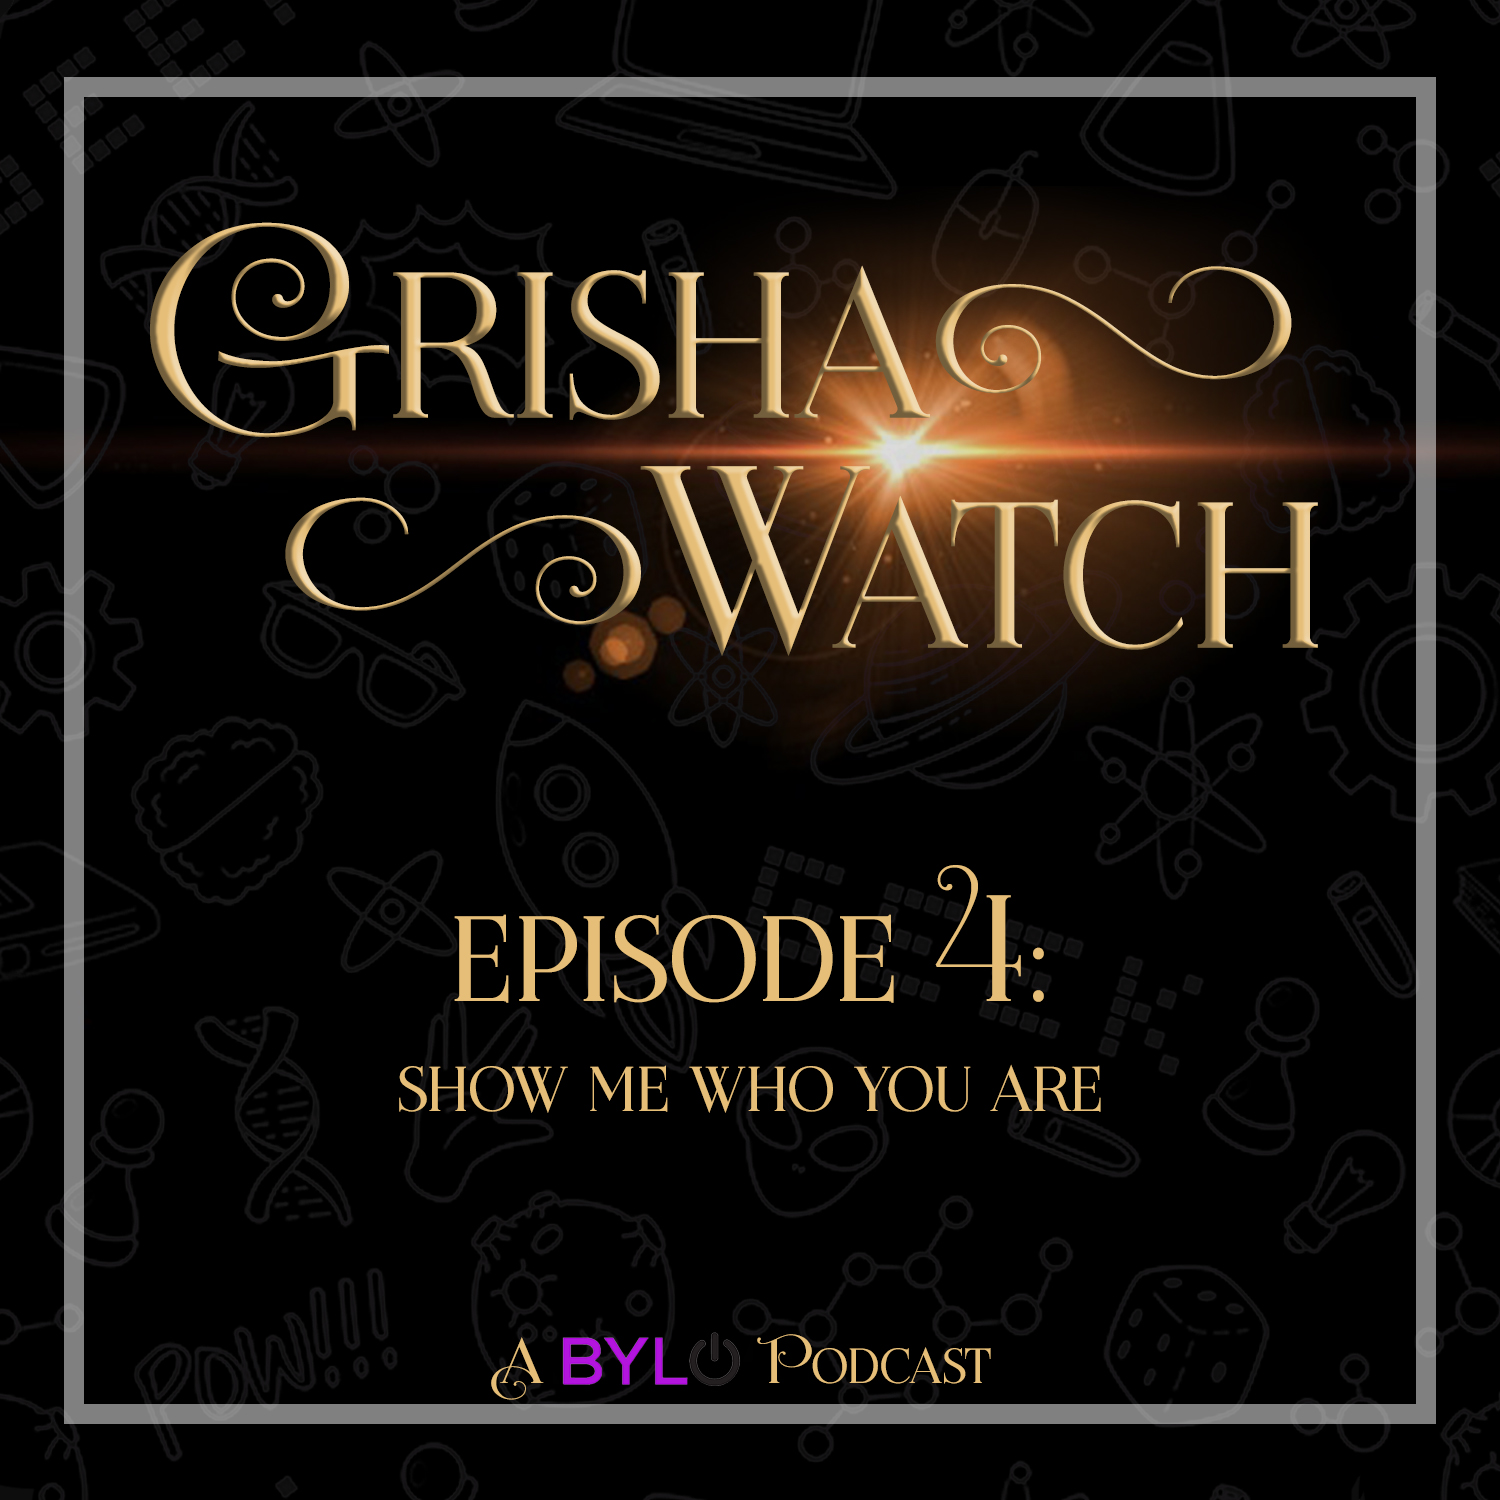 Grisha Watch ep 04: "Show Me Who You Are"